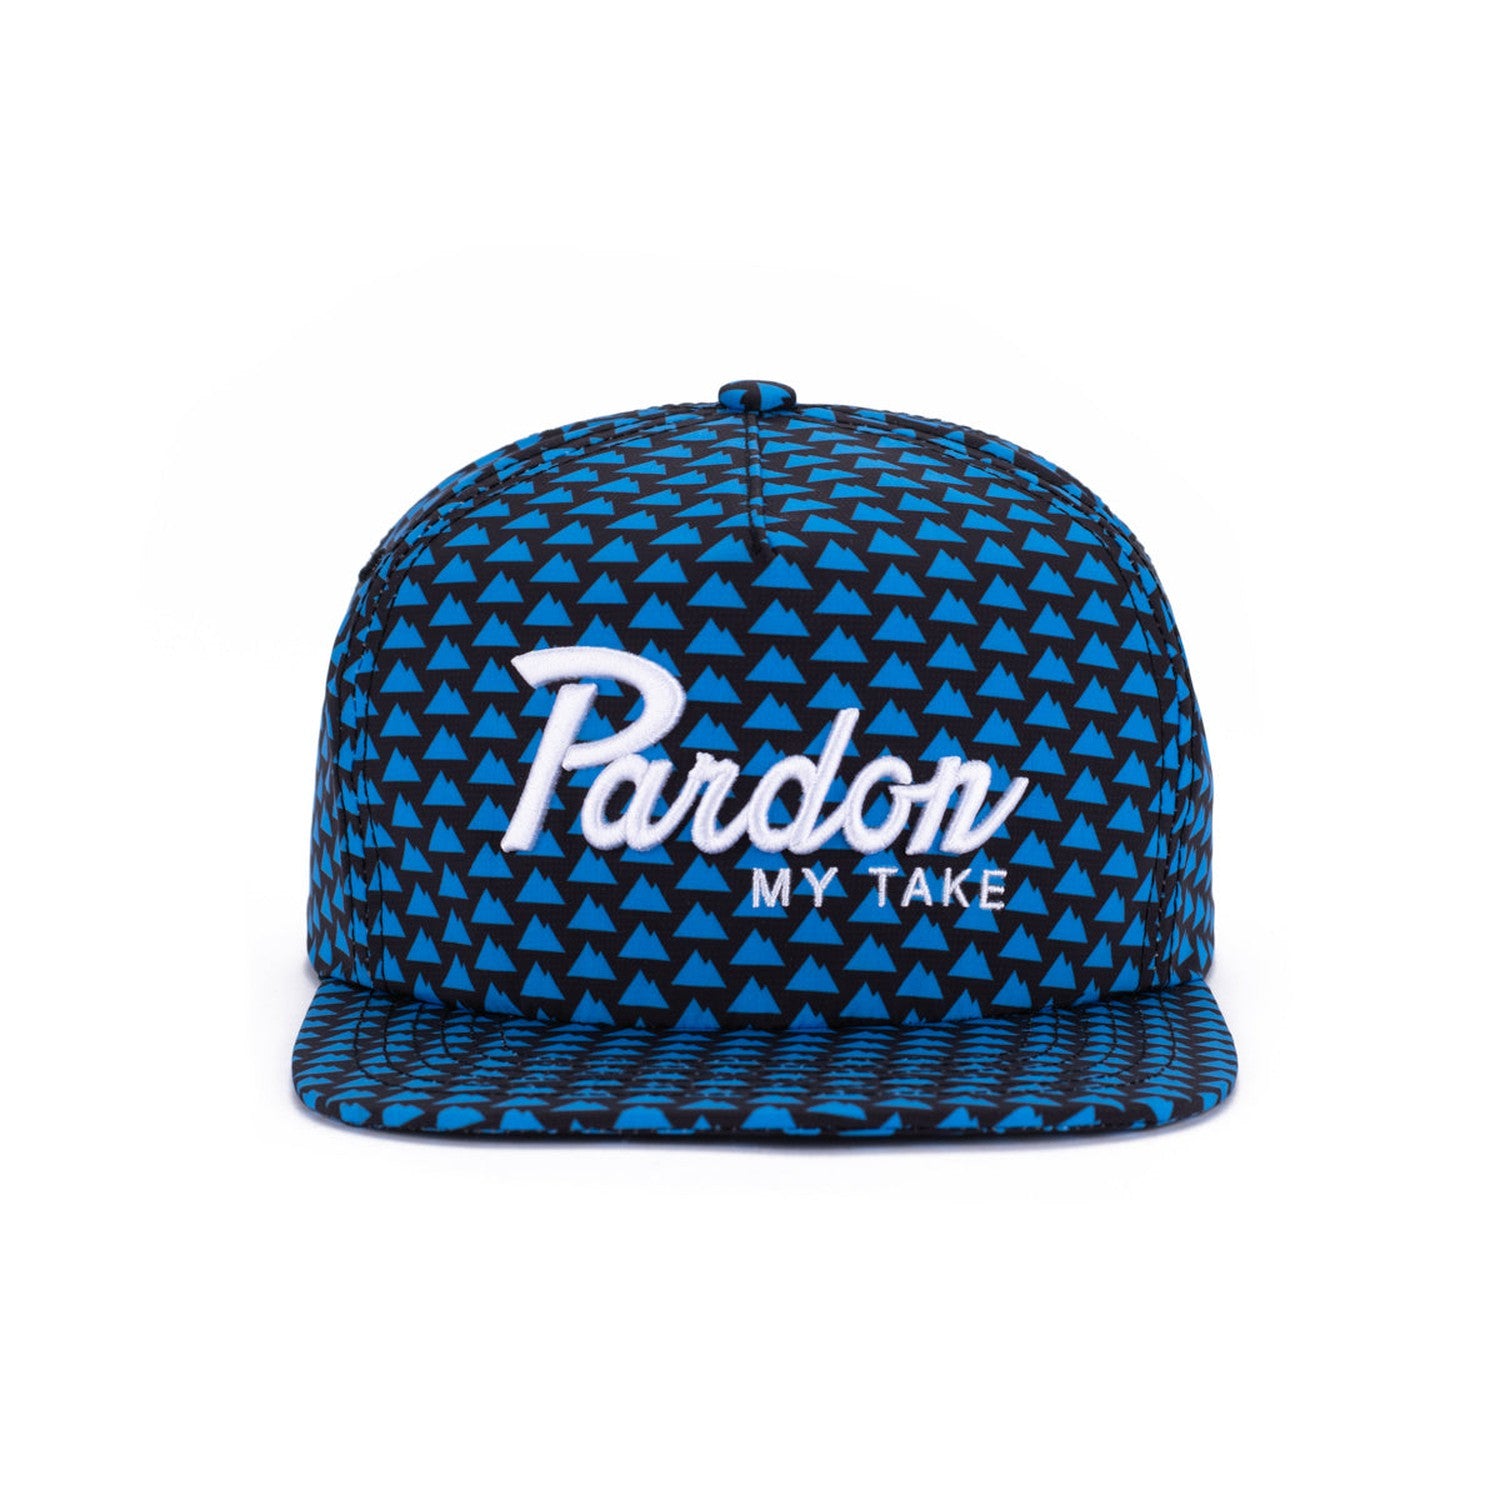 Coors x Pardon My Take Mountains Are Blue Snapback